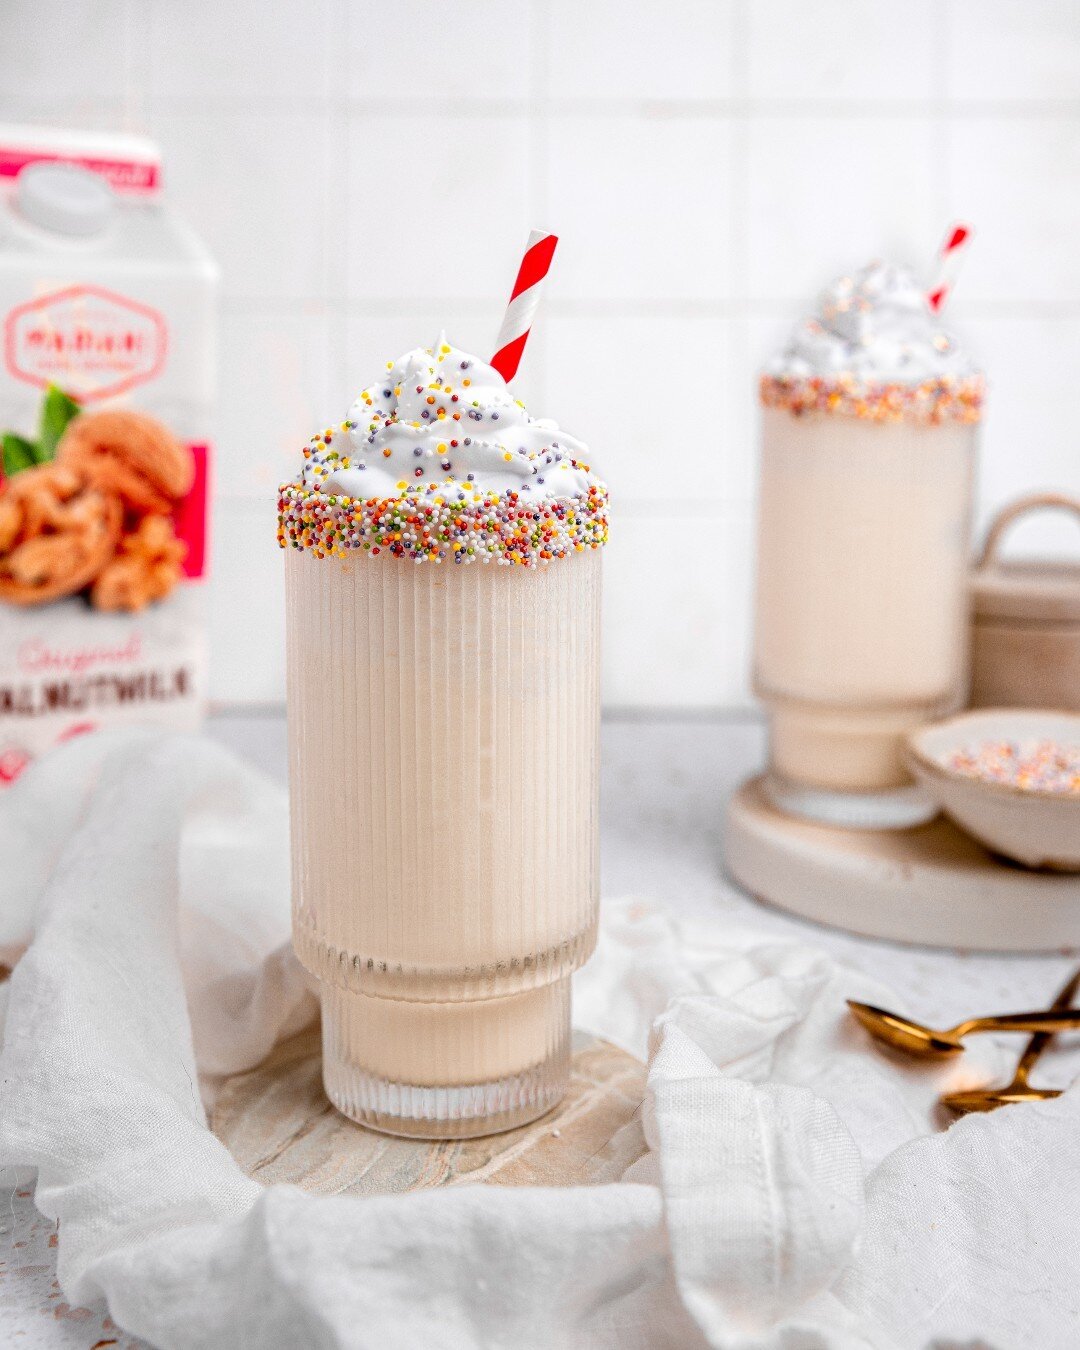 It doesn't have to be your birthday to enjoy this delicious Cake Batter Milkshake... The perfect treat for a hot summer day!